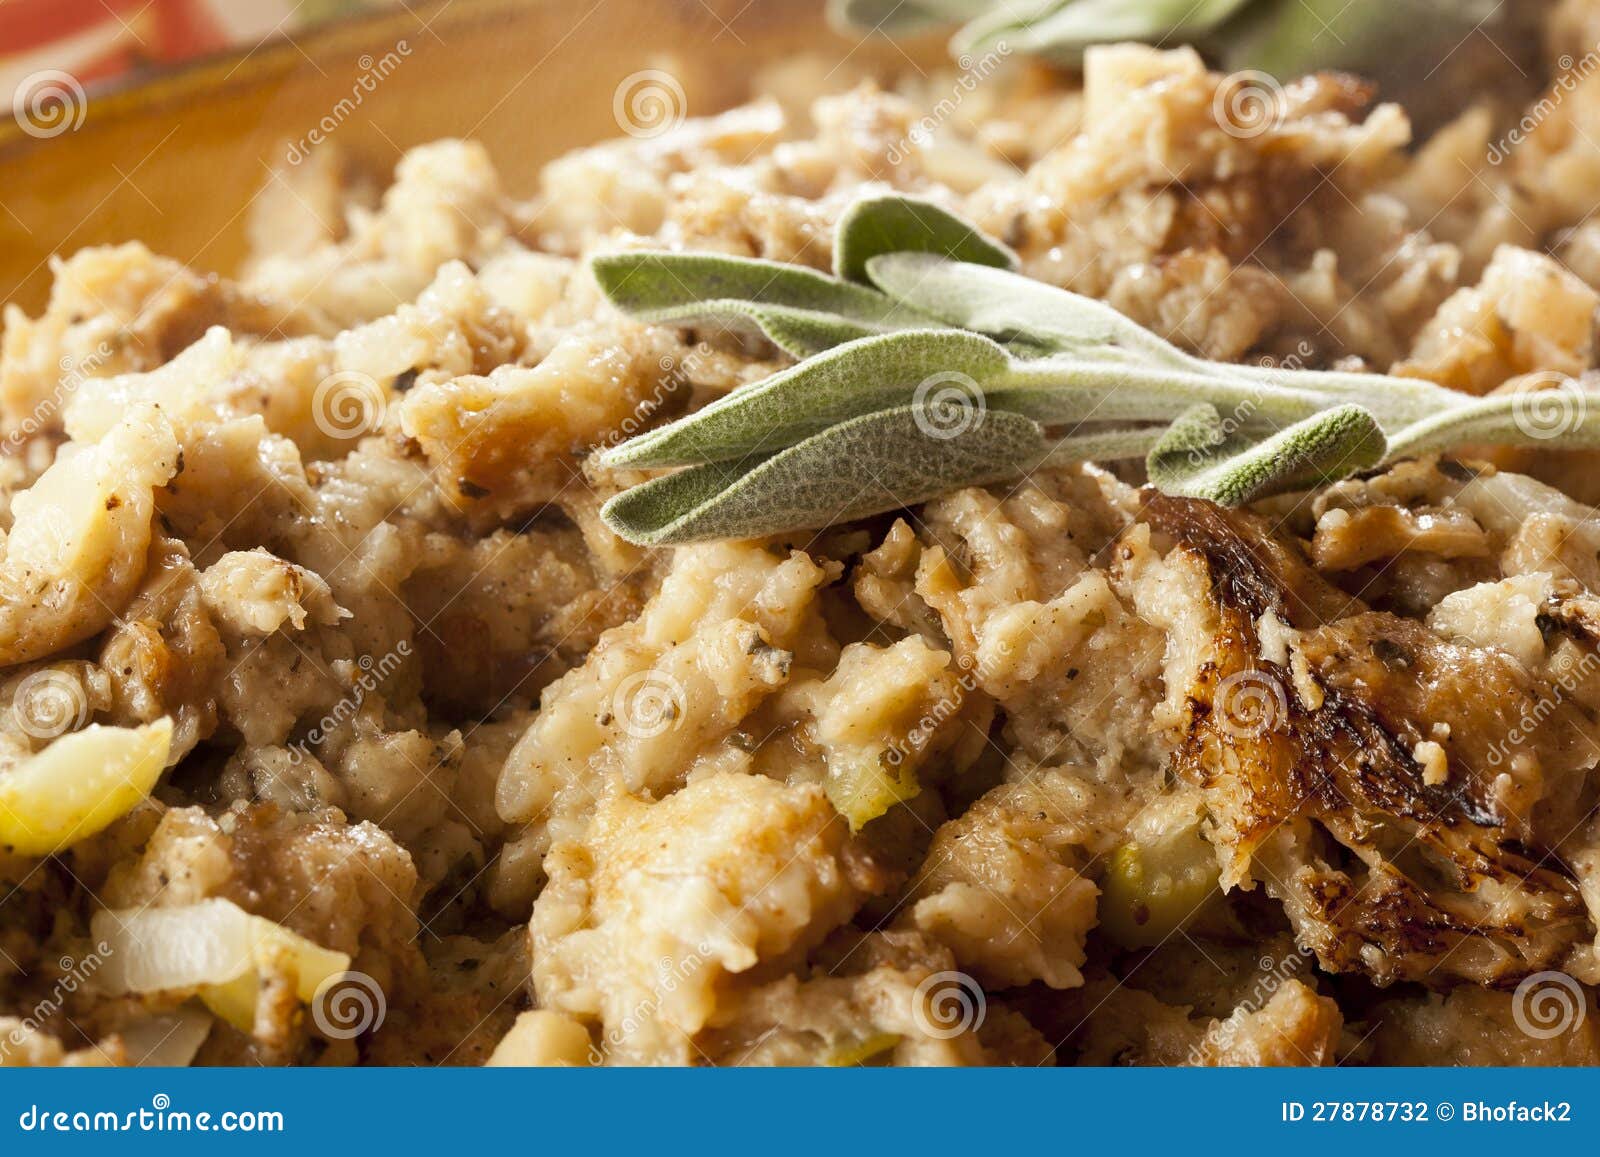 Homemade Stuffing Made for Thanksgiving Stock Photo - Image of baked ...